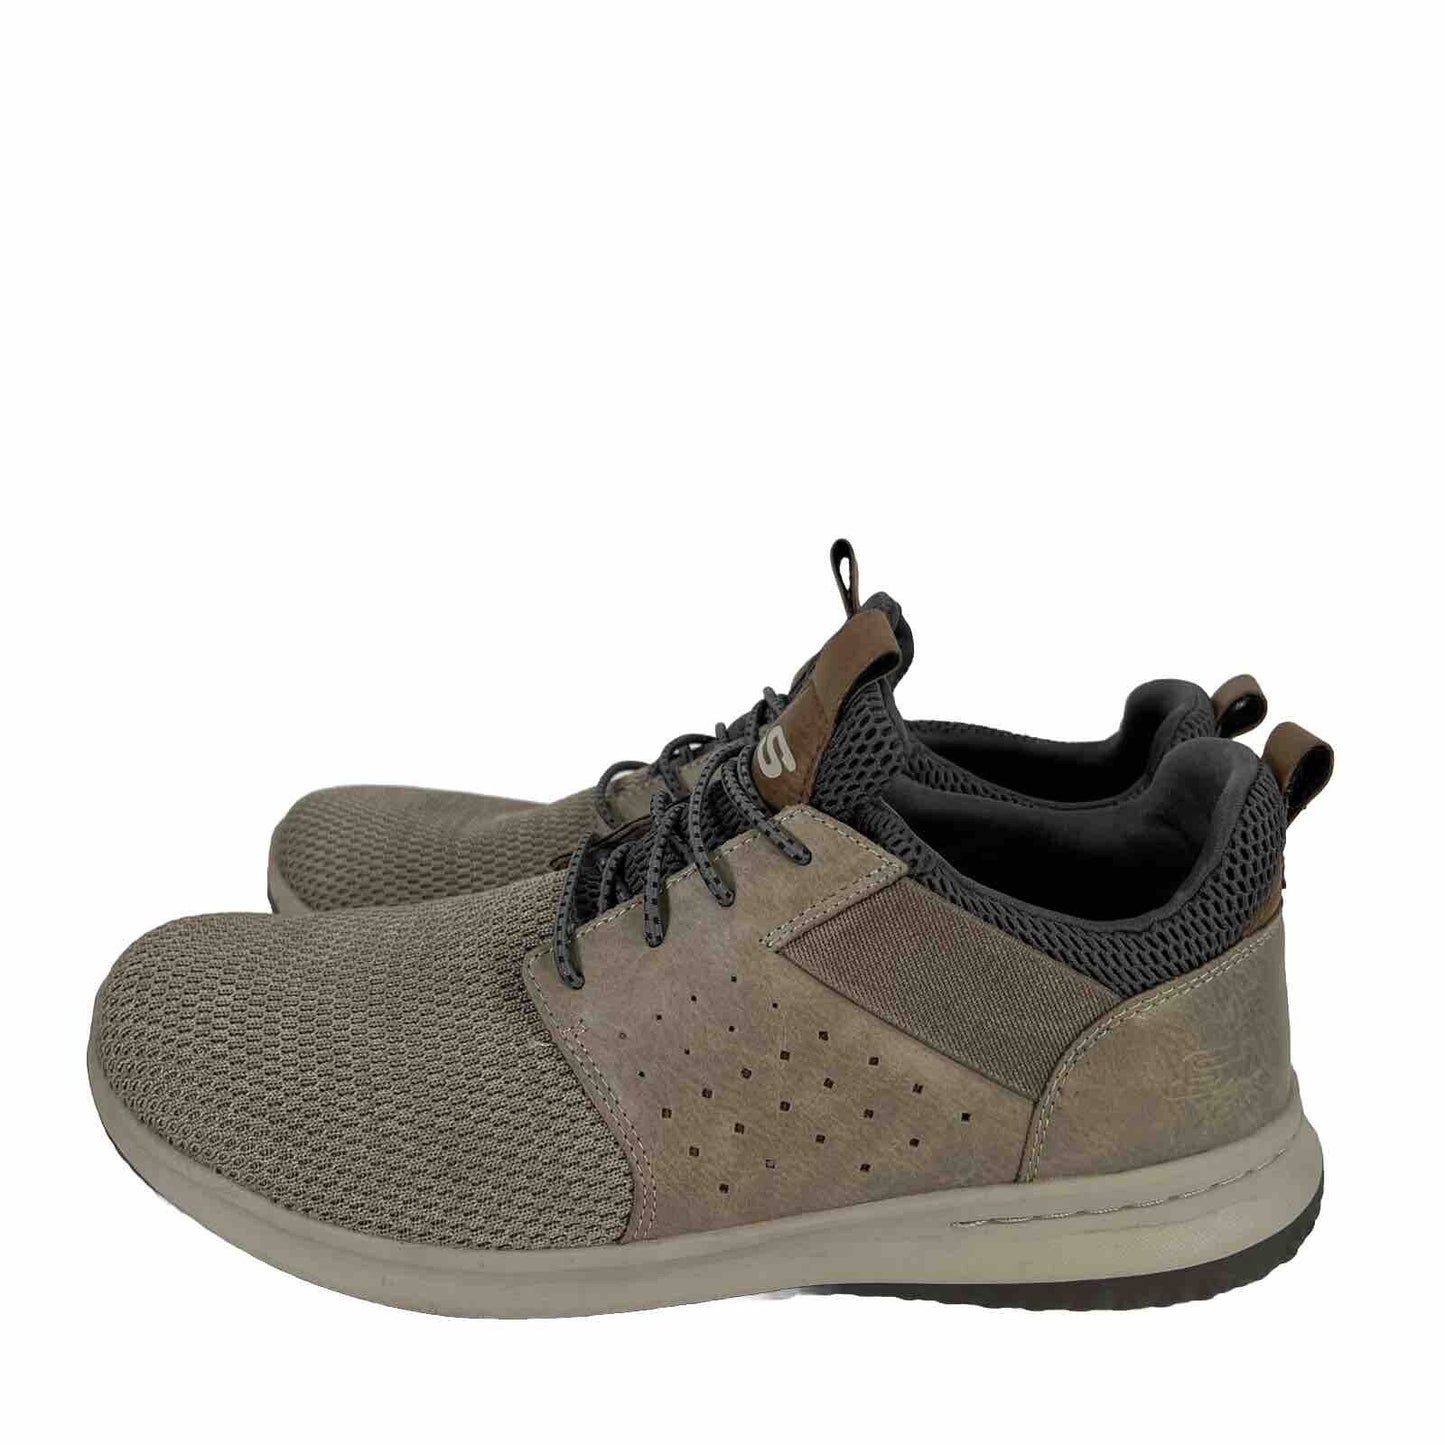 Skechers Men's Beige/Taupe  Relaxed Fit Braver Rayland Sneakers - 12